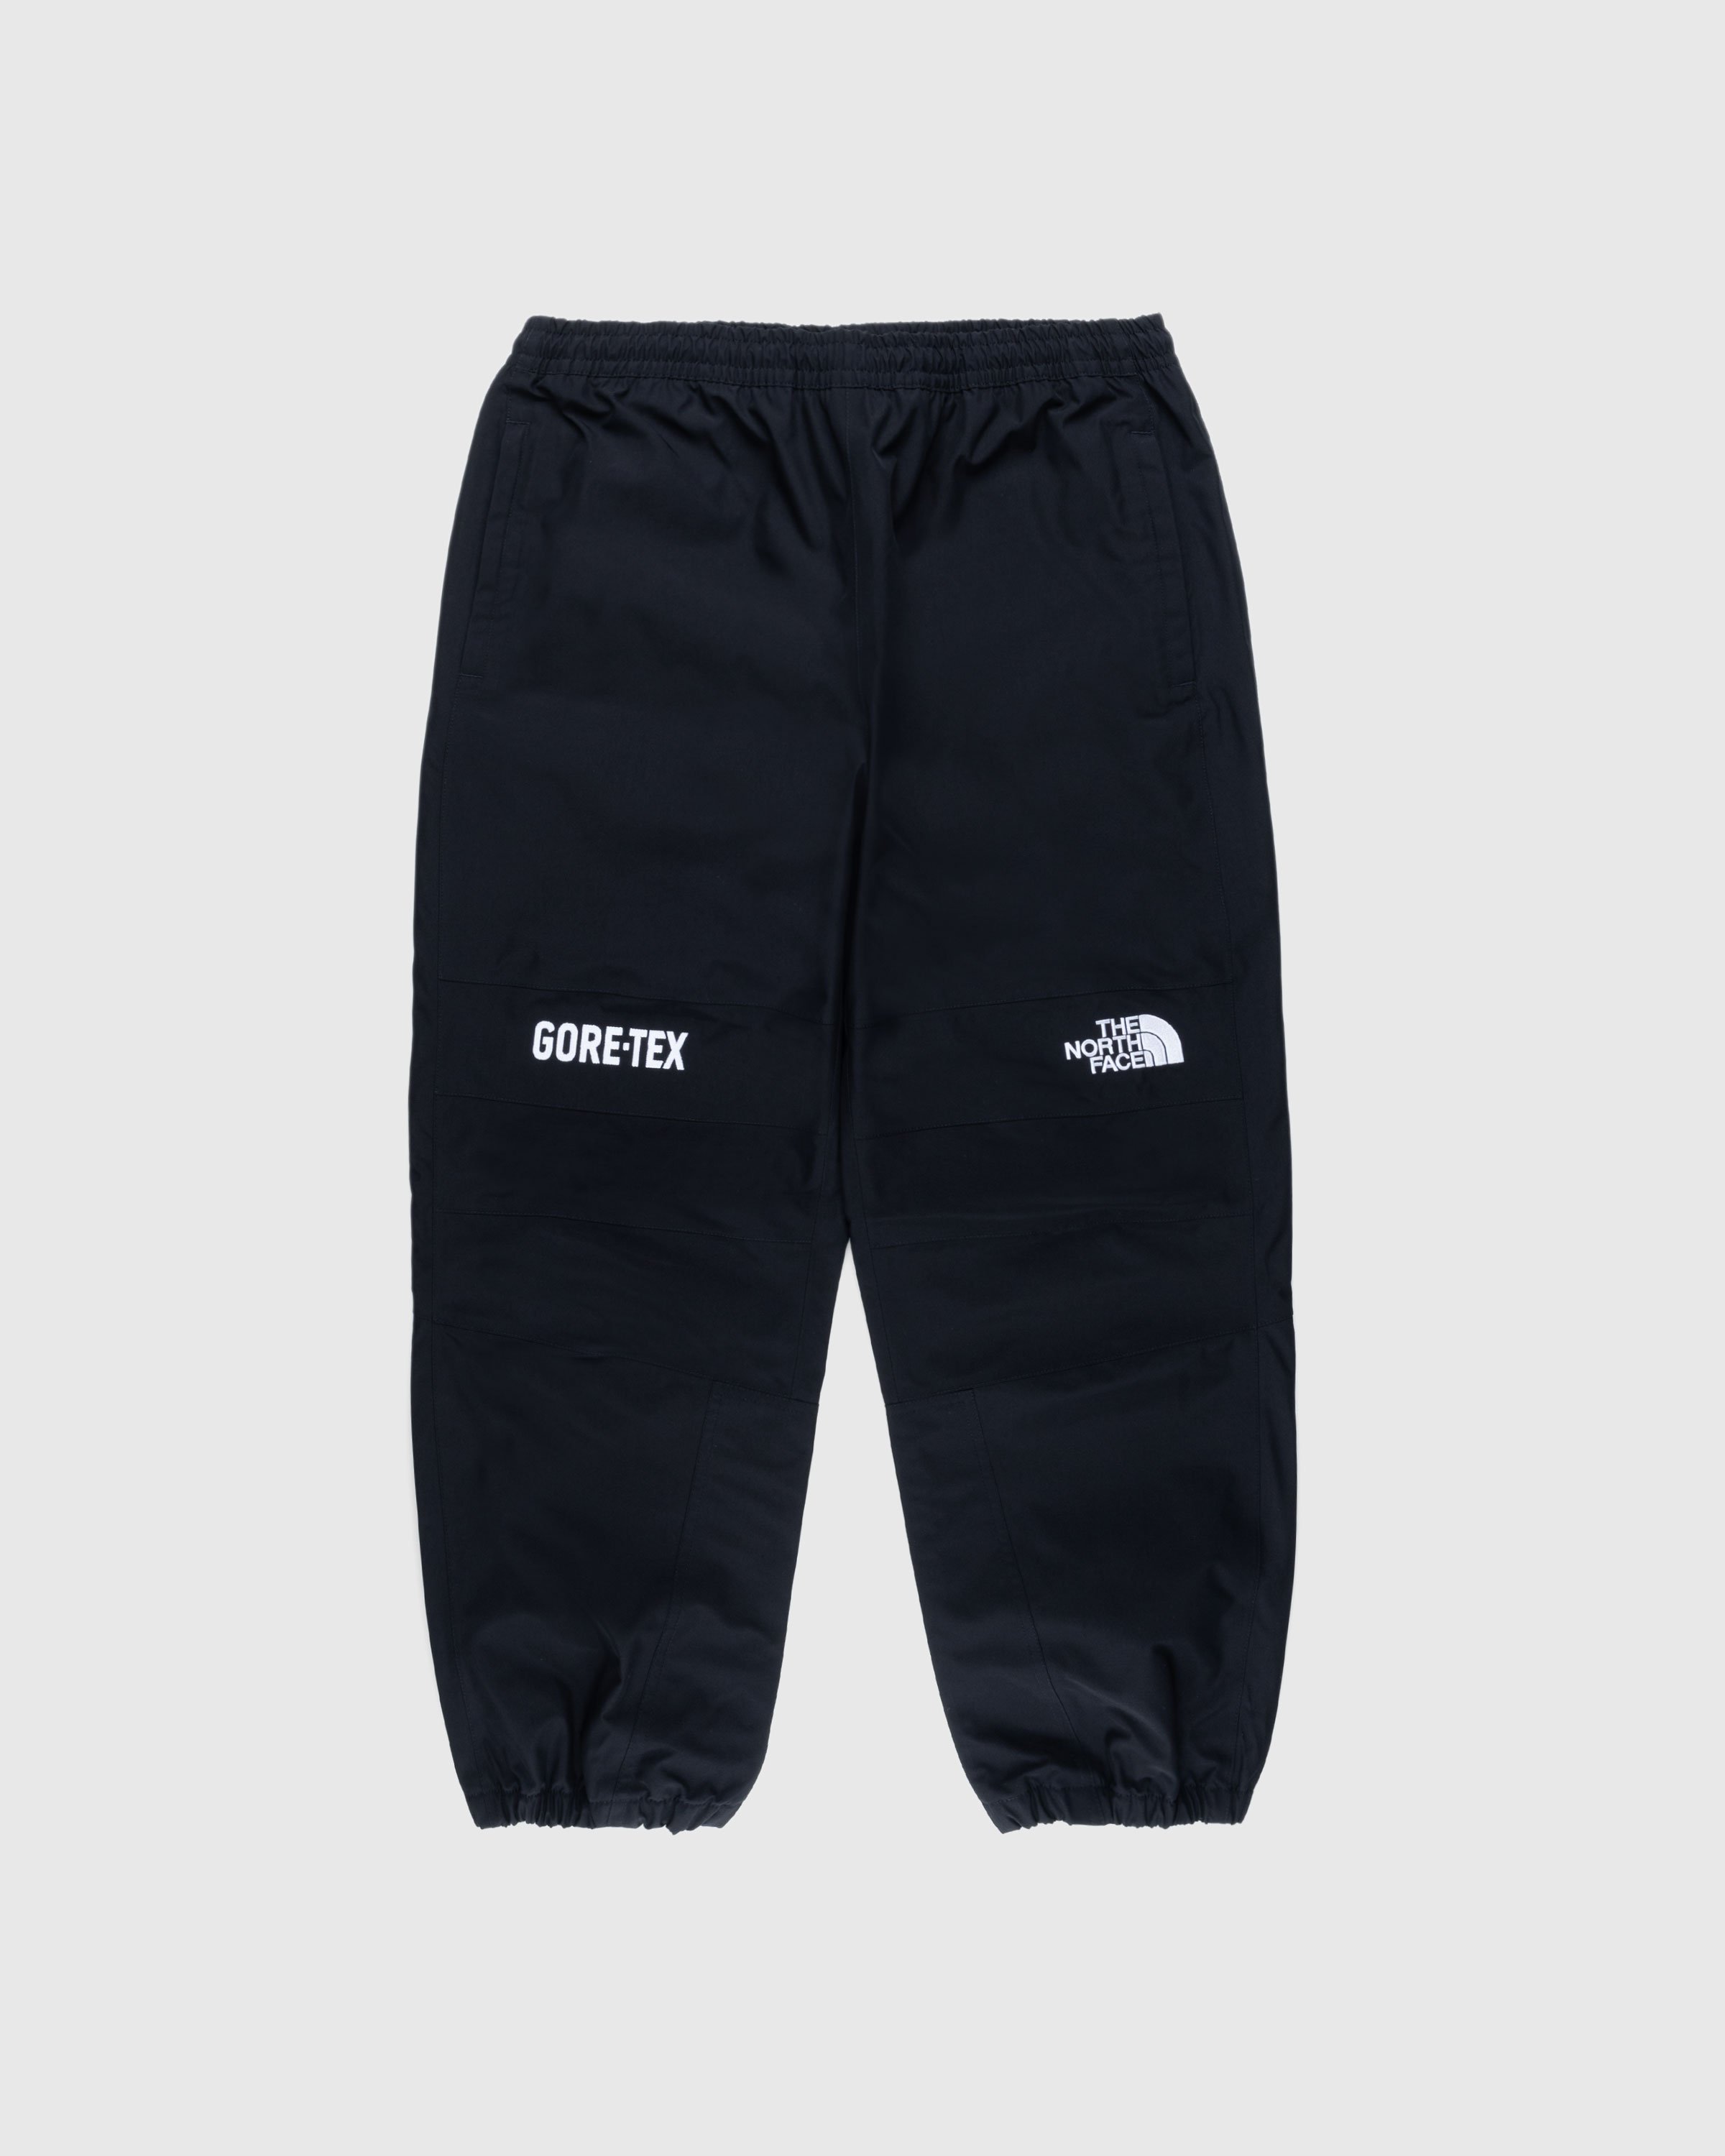 The North Face - GORE-TEX Mountain Pants Black - Clothing - Black - Image 1